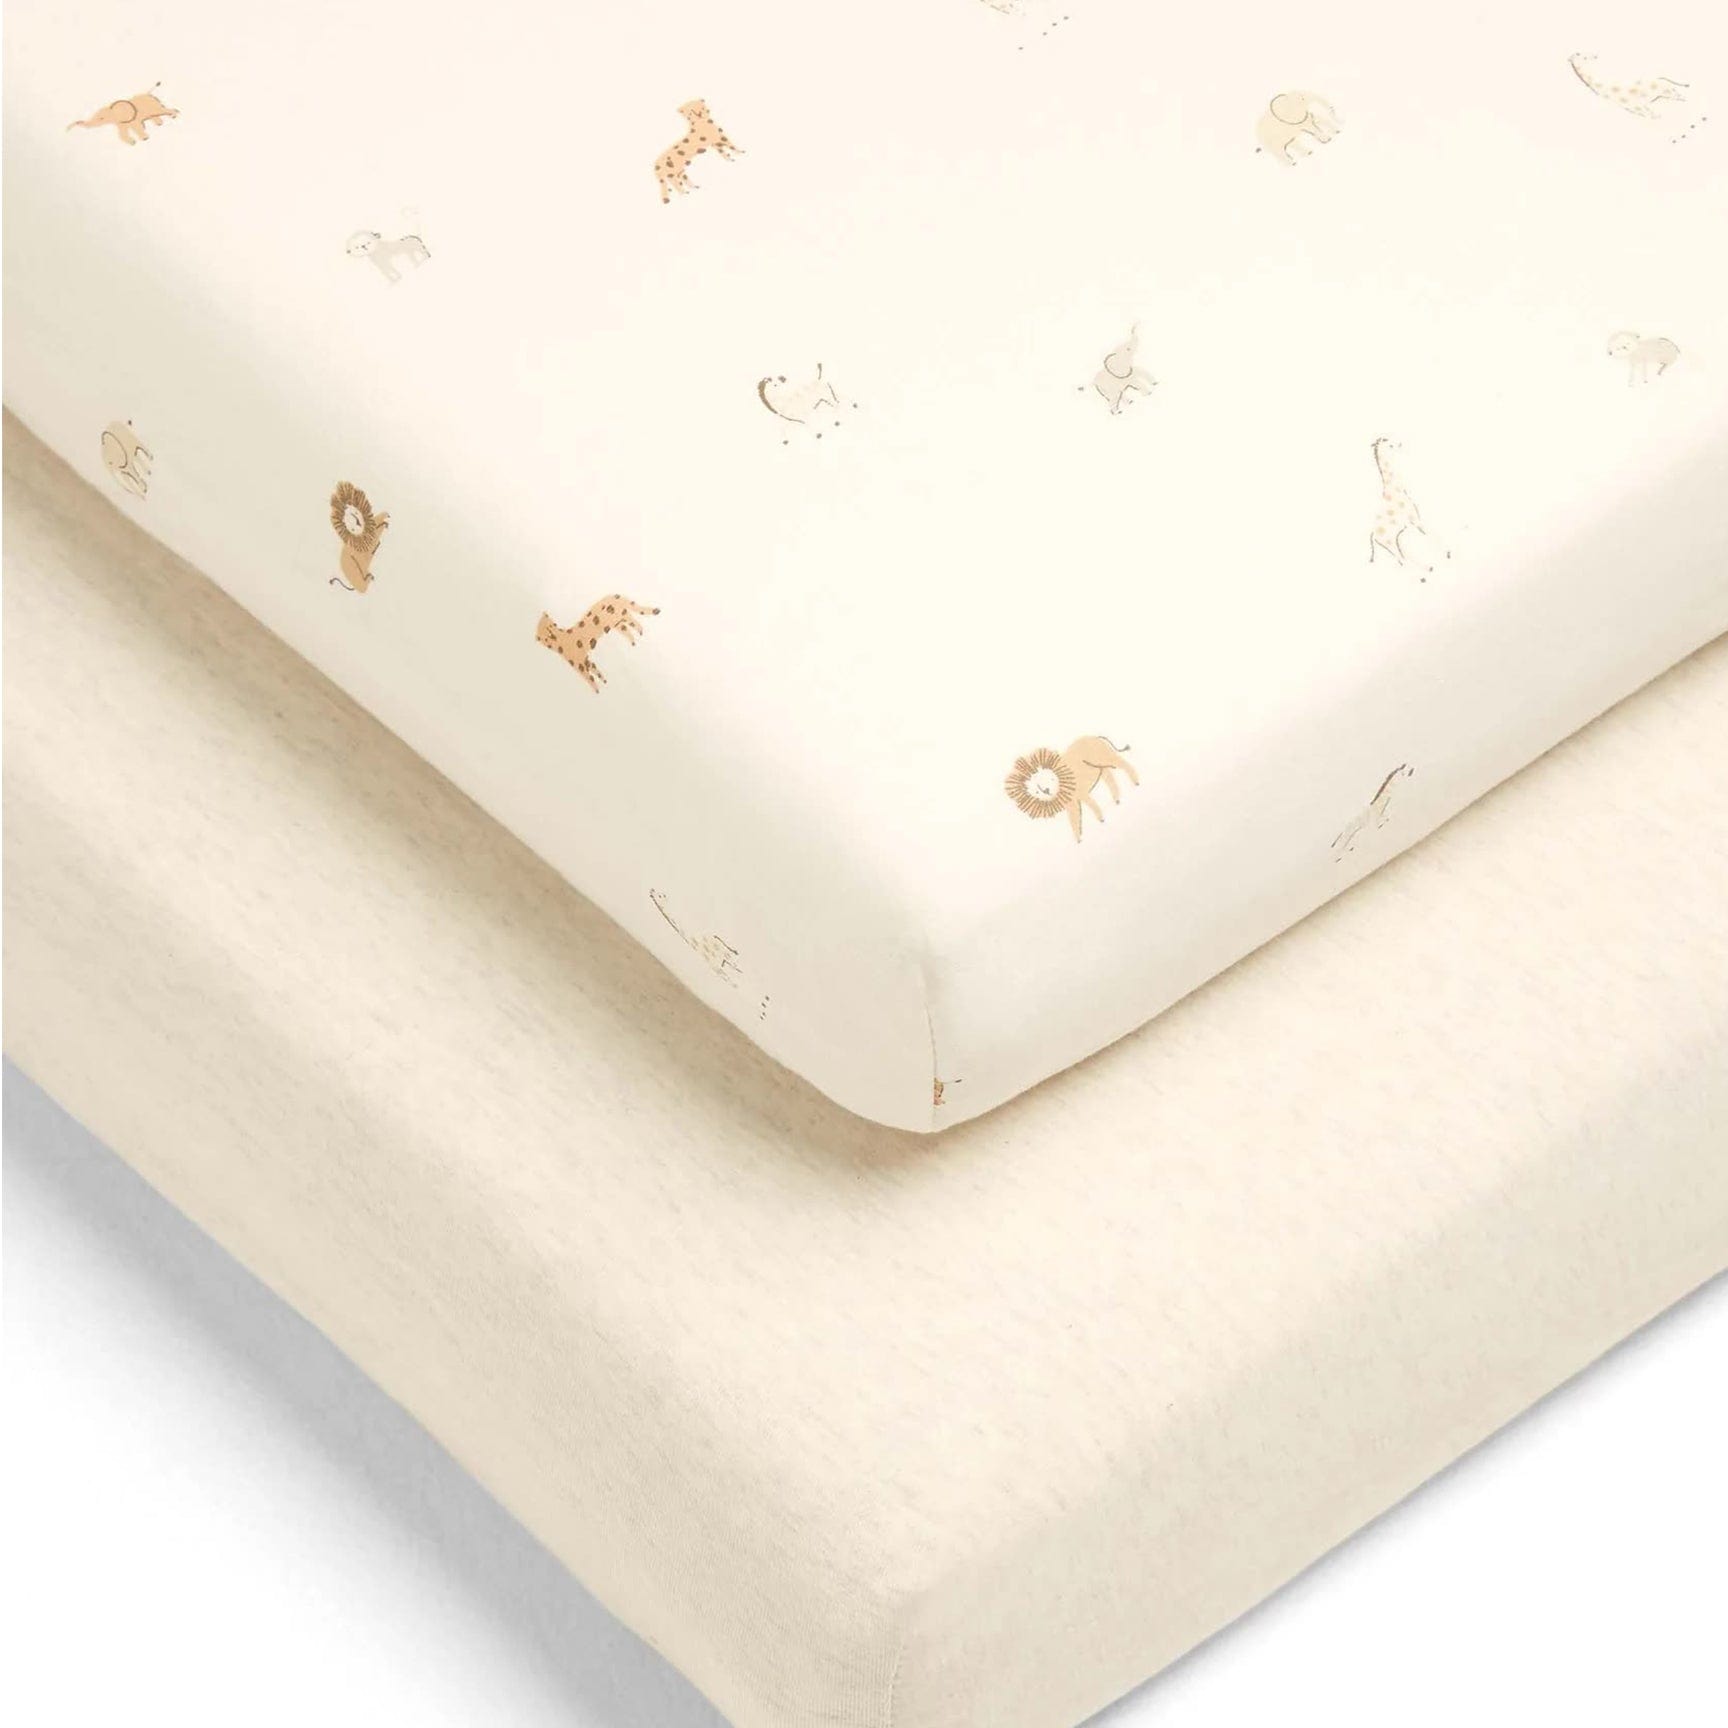 Mamas & Papas cot bed sheets Mamas & Papas Cotbed Fitted Sheets - Born to be Wild 7797CL700